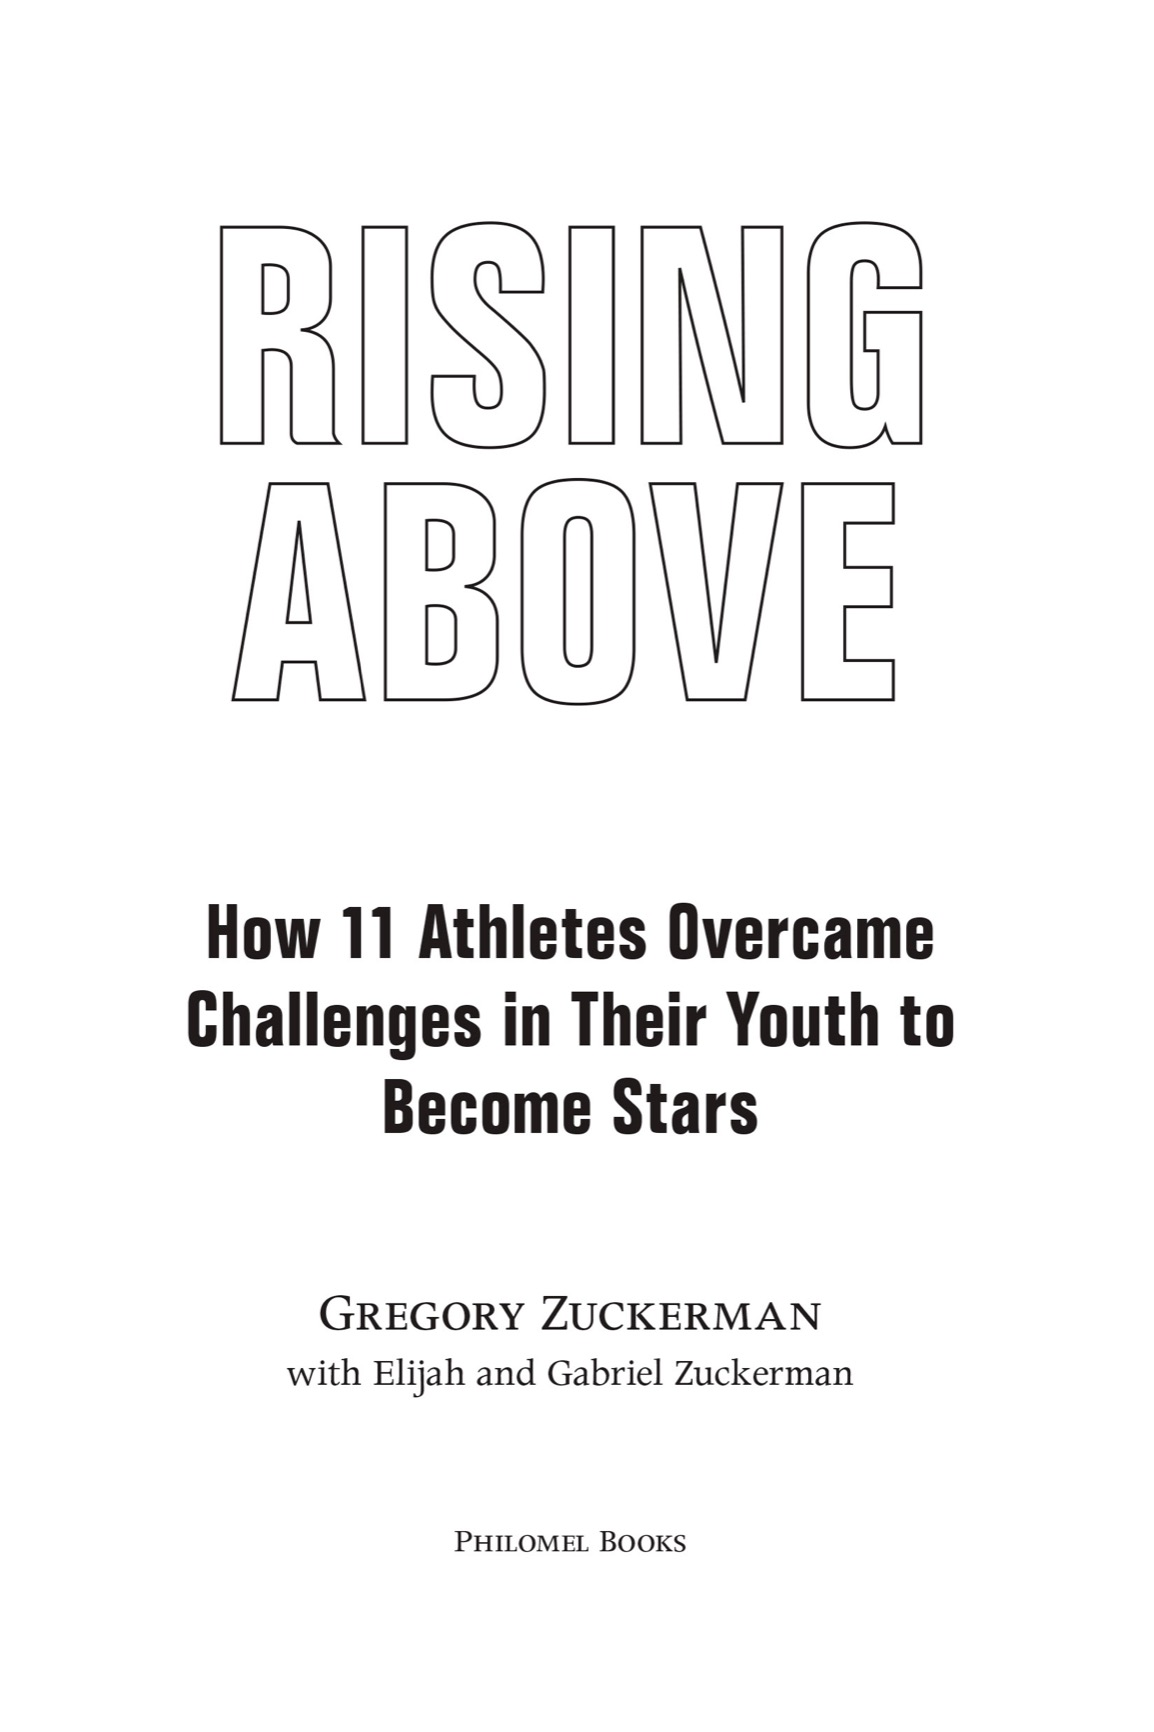 Rising Above How 11 Athletes Overcame Challenges in Their Youth to Become Stars - image 2